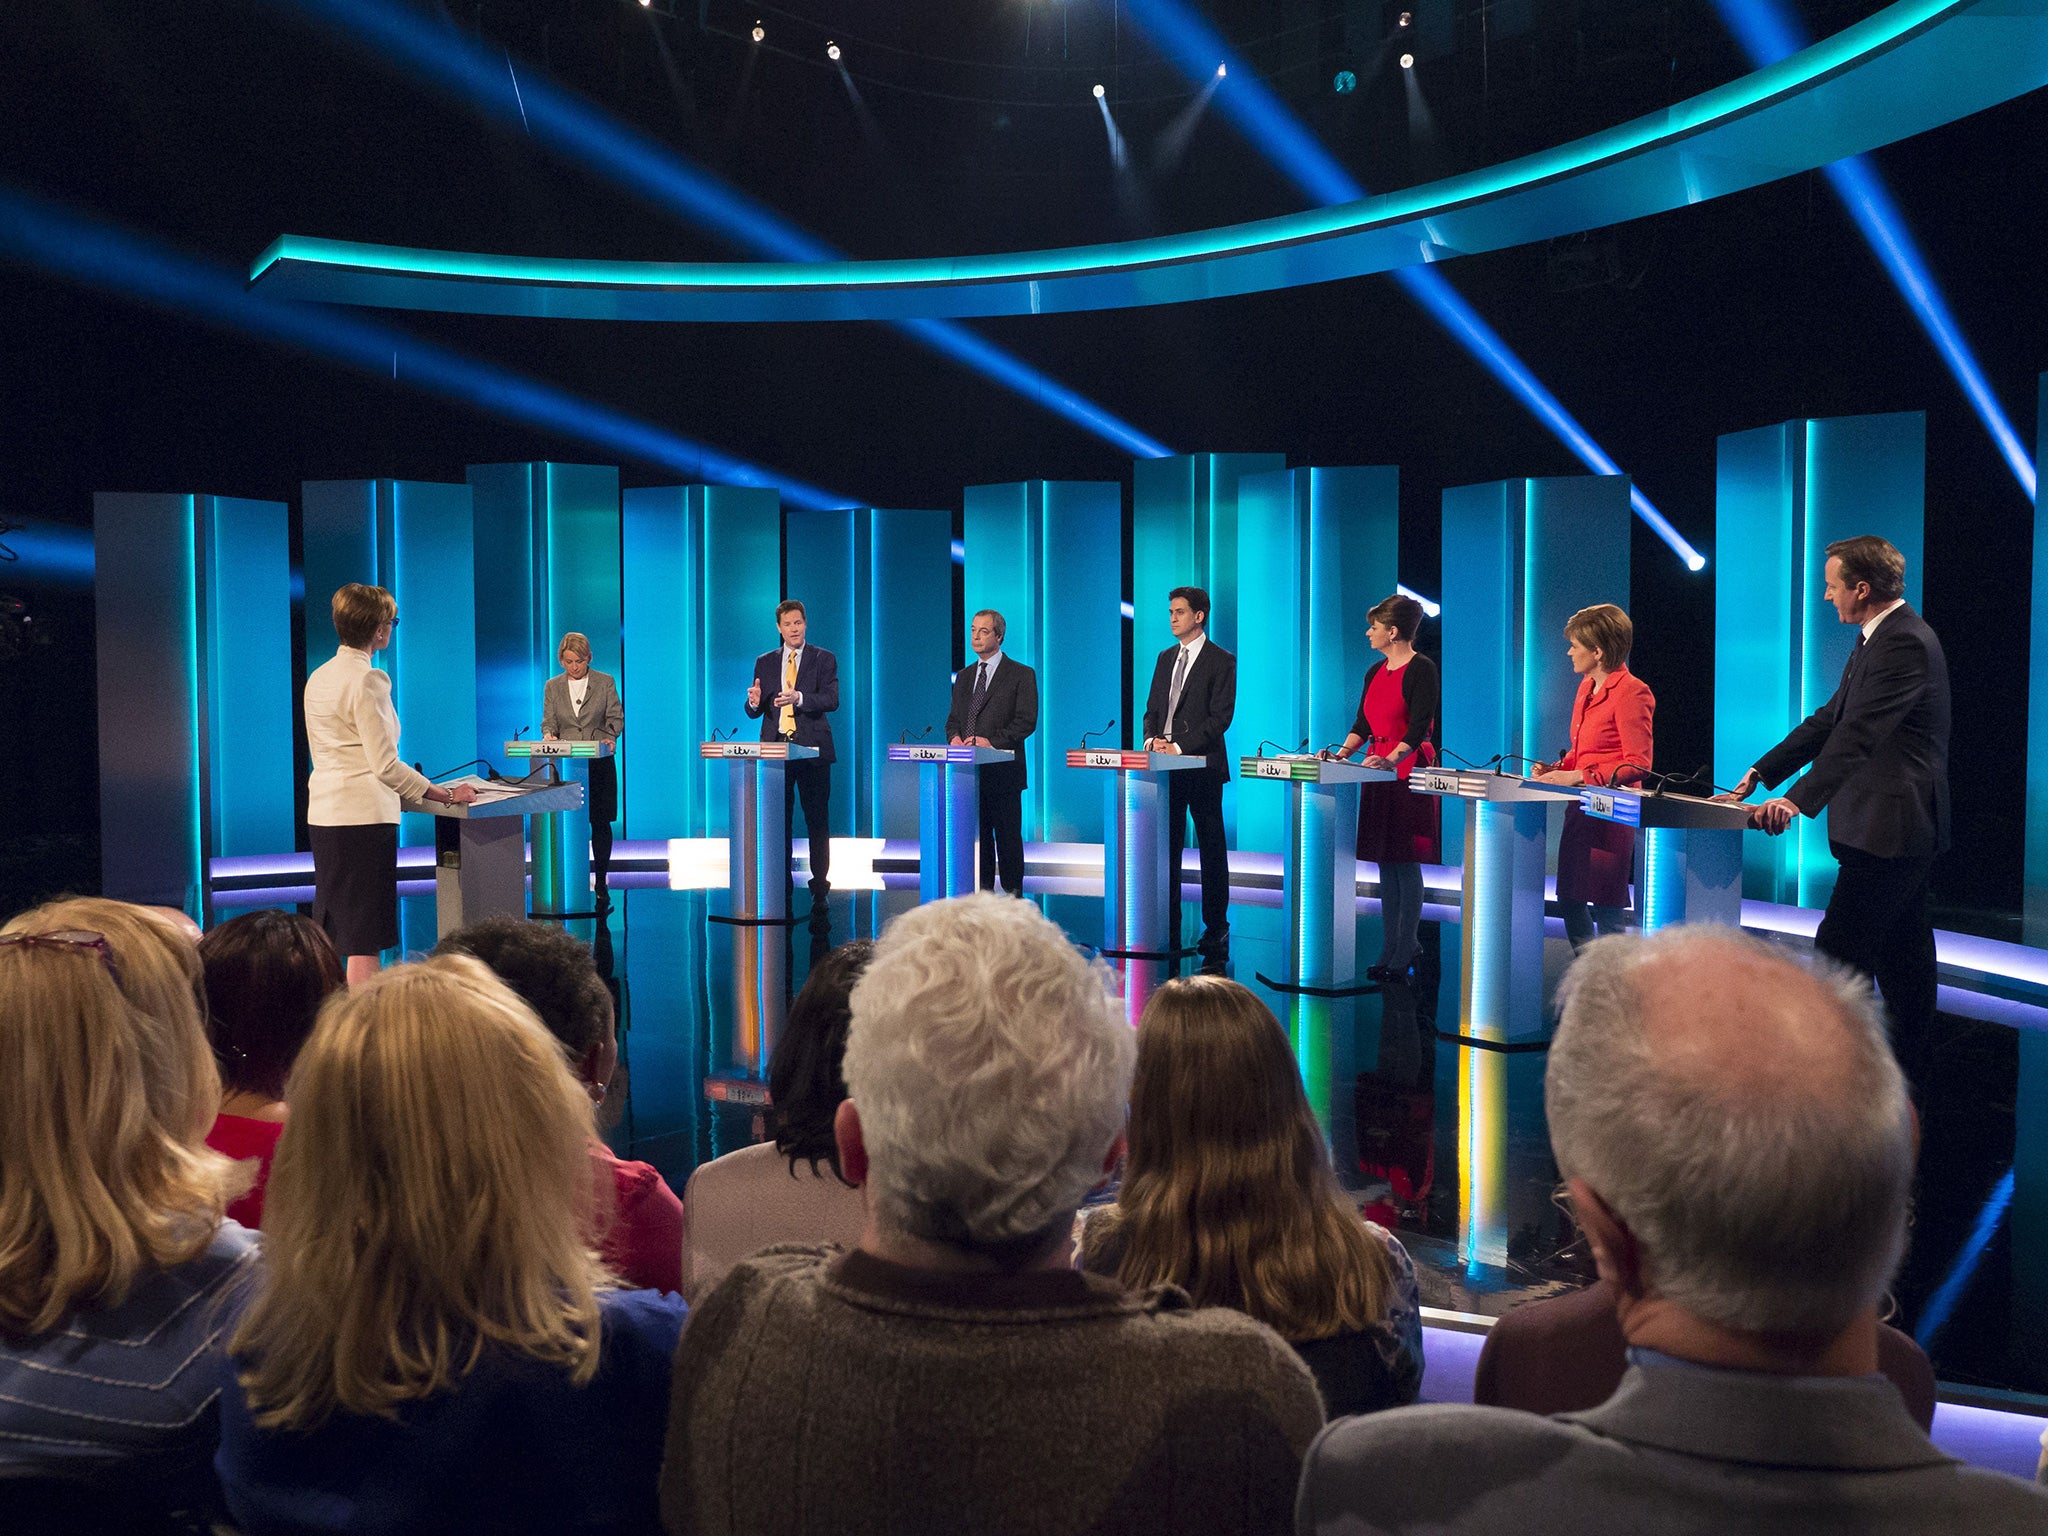 Sharpen your pencils and prepare for our ultimate General Election quiz